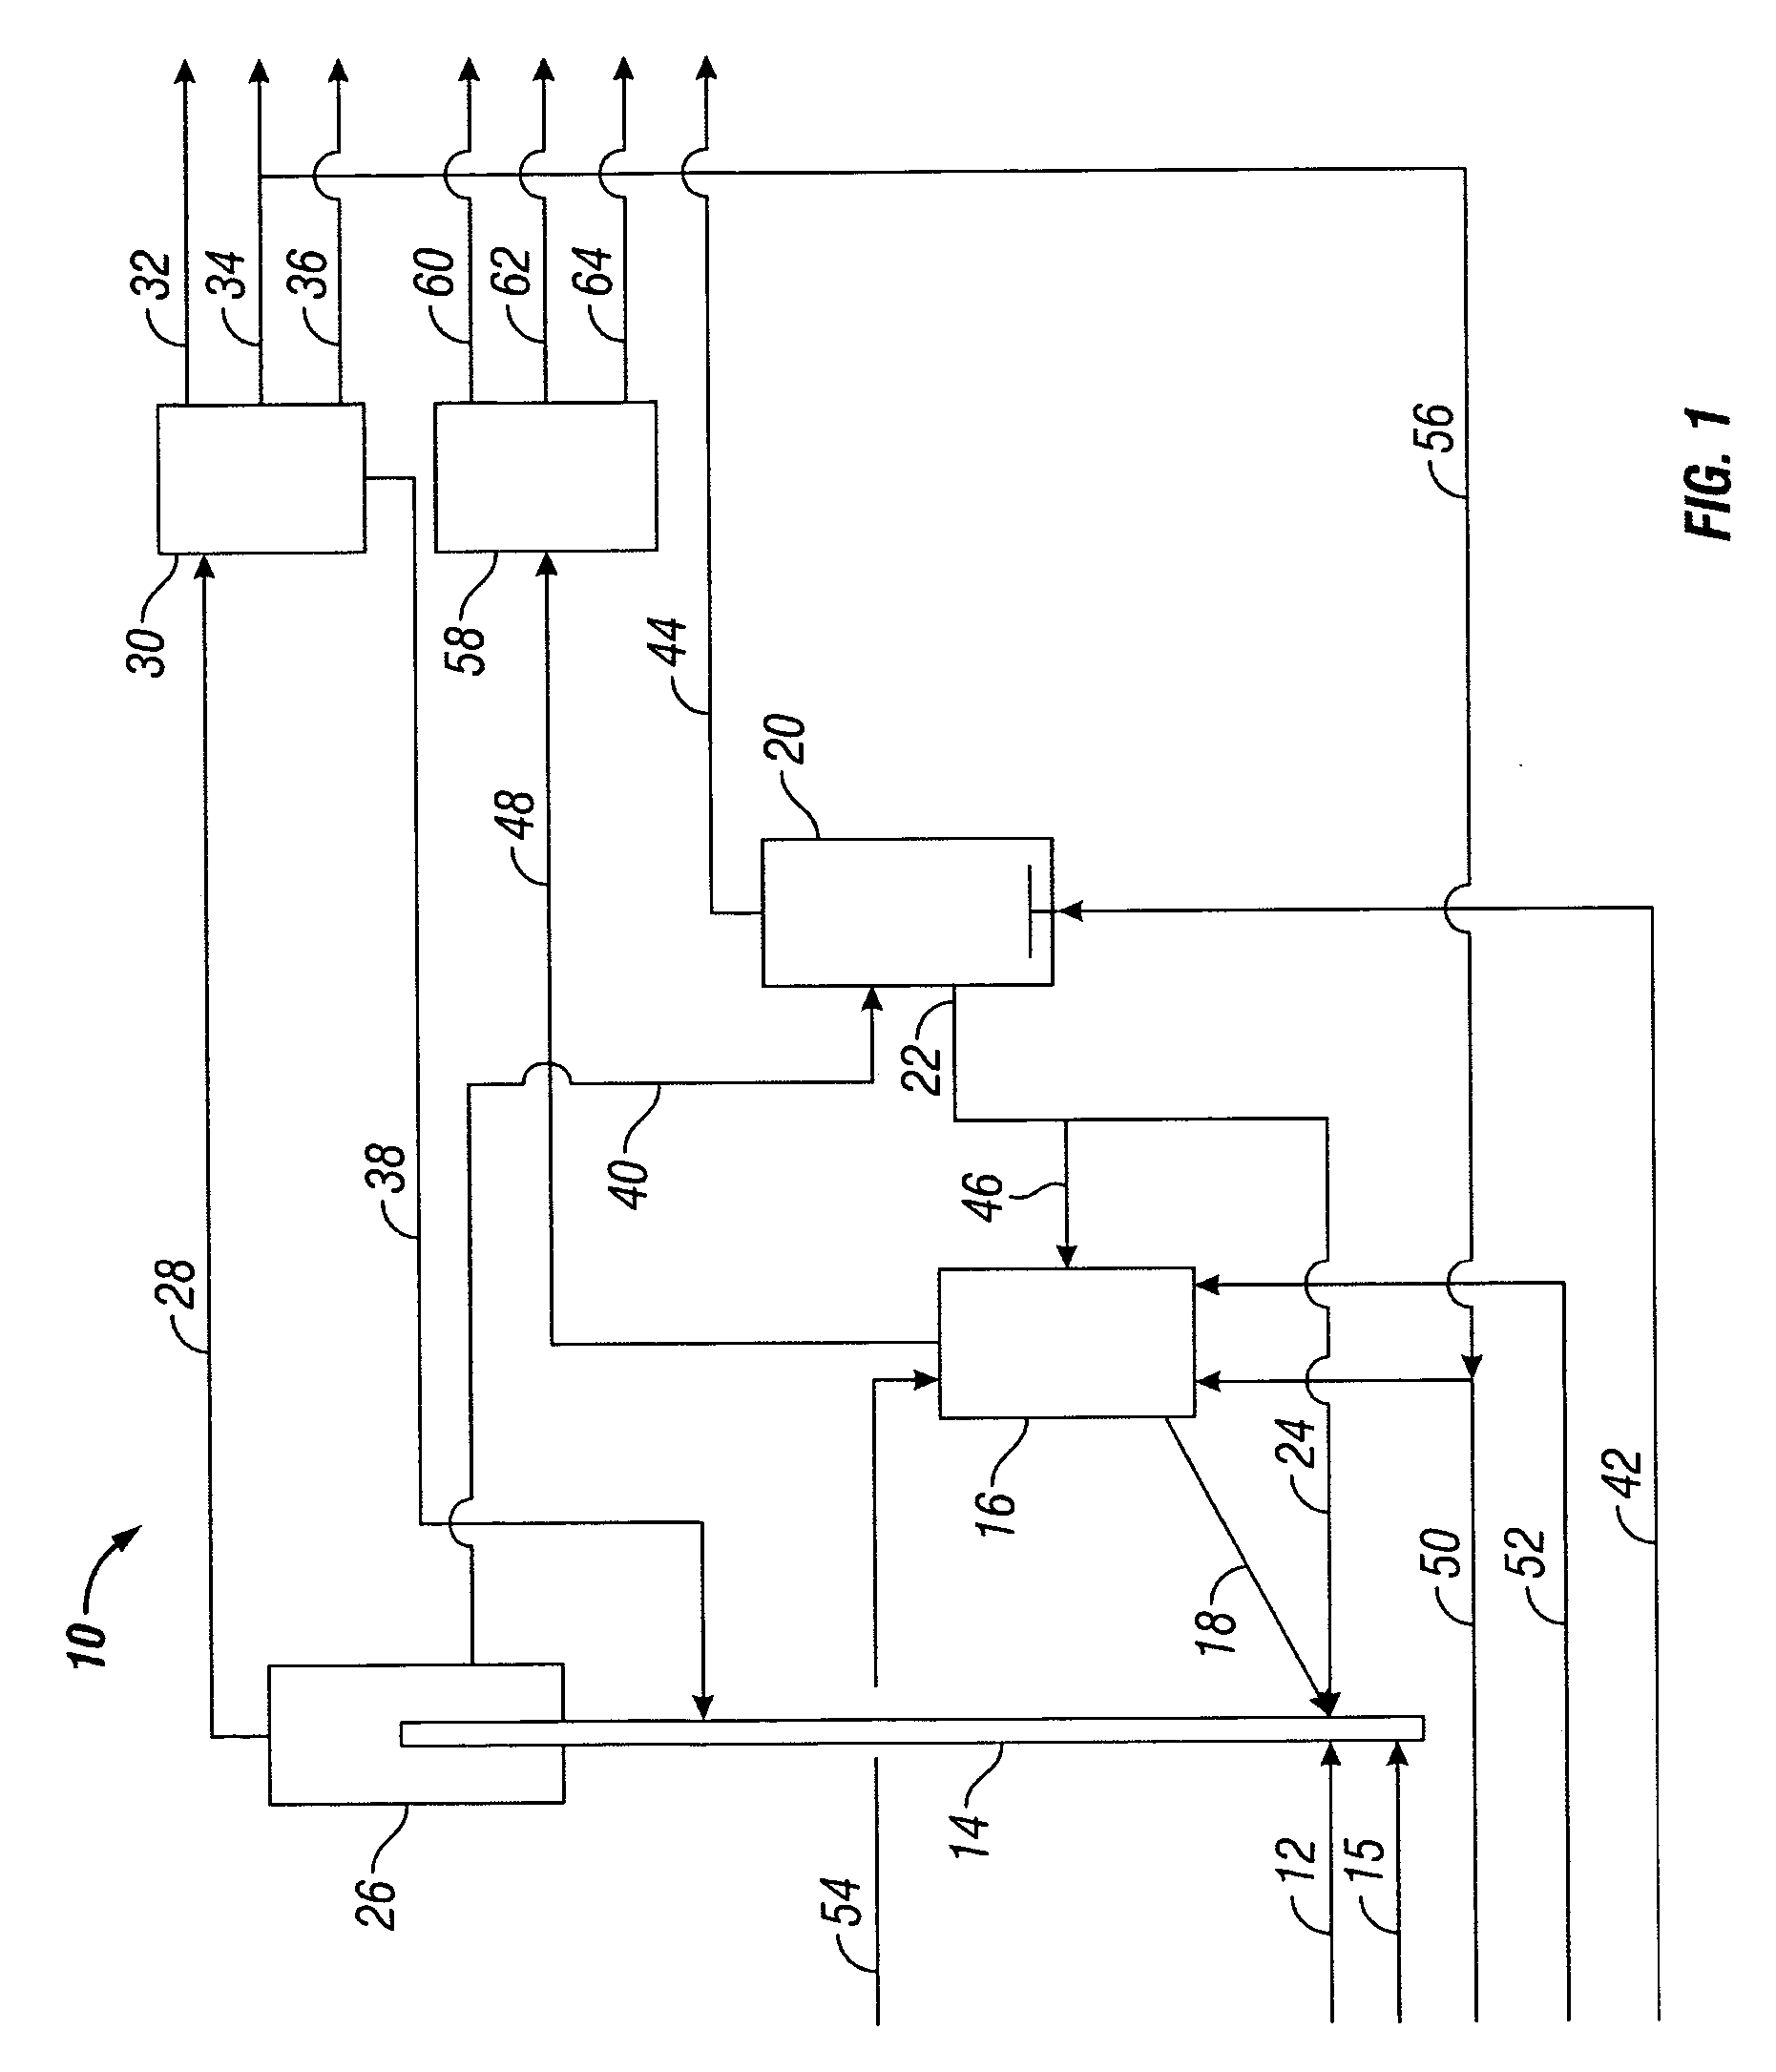 Method and apparatus for making a middle distillate product and lower olefins from a hydrocarbon feedstock